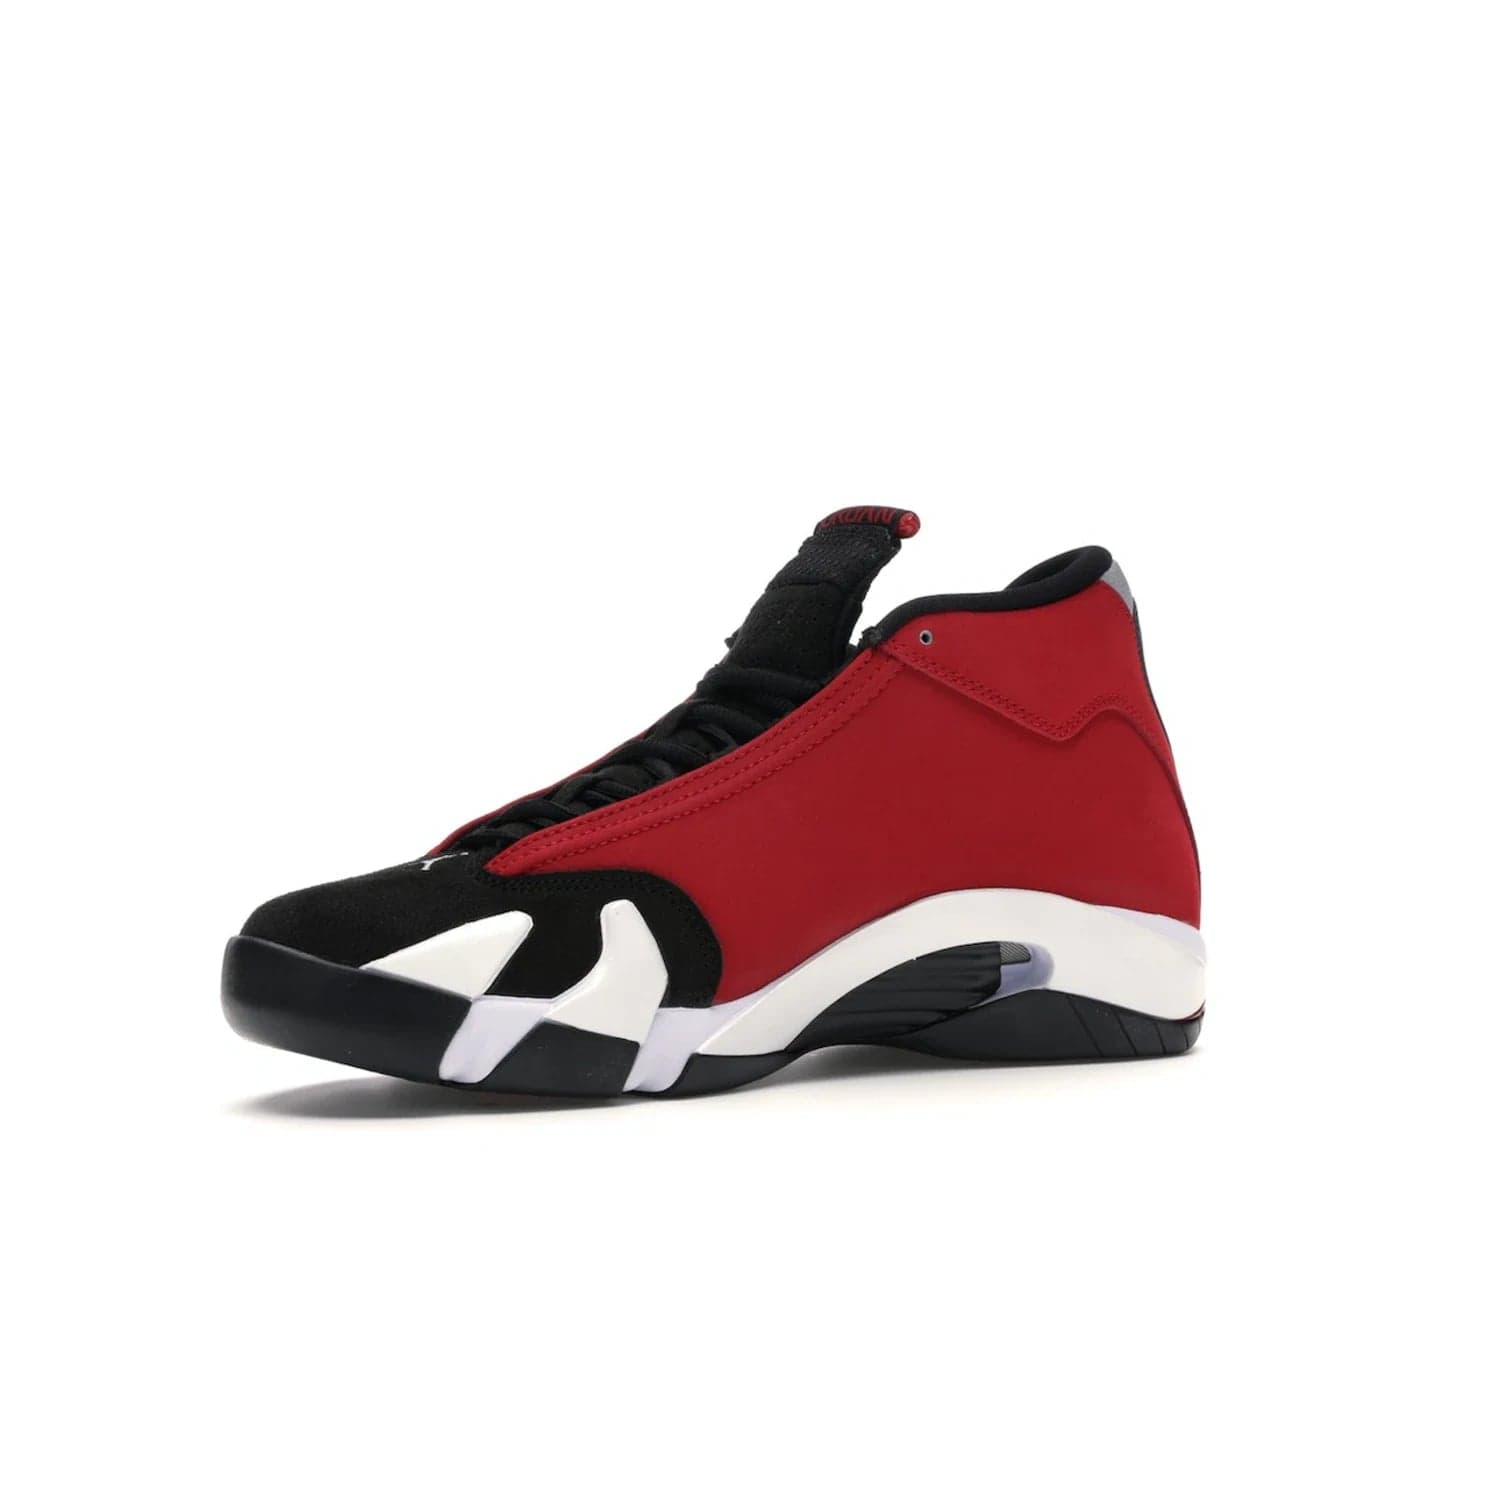 Jordan 14 Retro Gym Red Toro - Image 16 - Only at www.BallersClubKickz.com - Feel the Chicago Bulls energy with the Jordan 14 Retro Gym Red Toro! Black, red, and white design unites performance and fashion. Get your hands on this limited edition Jordan and show off your style today.